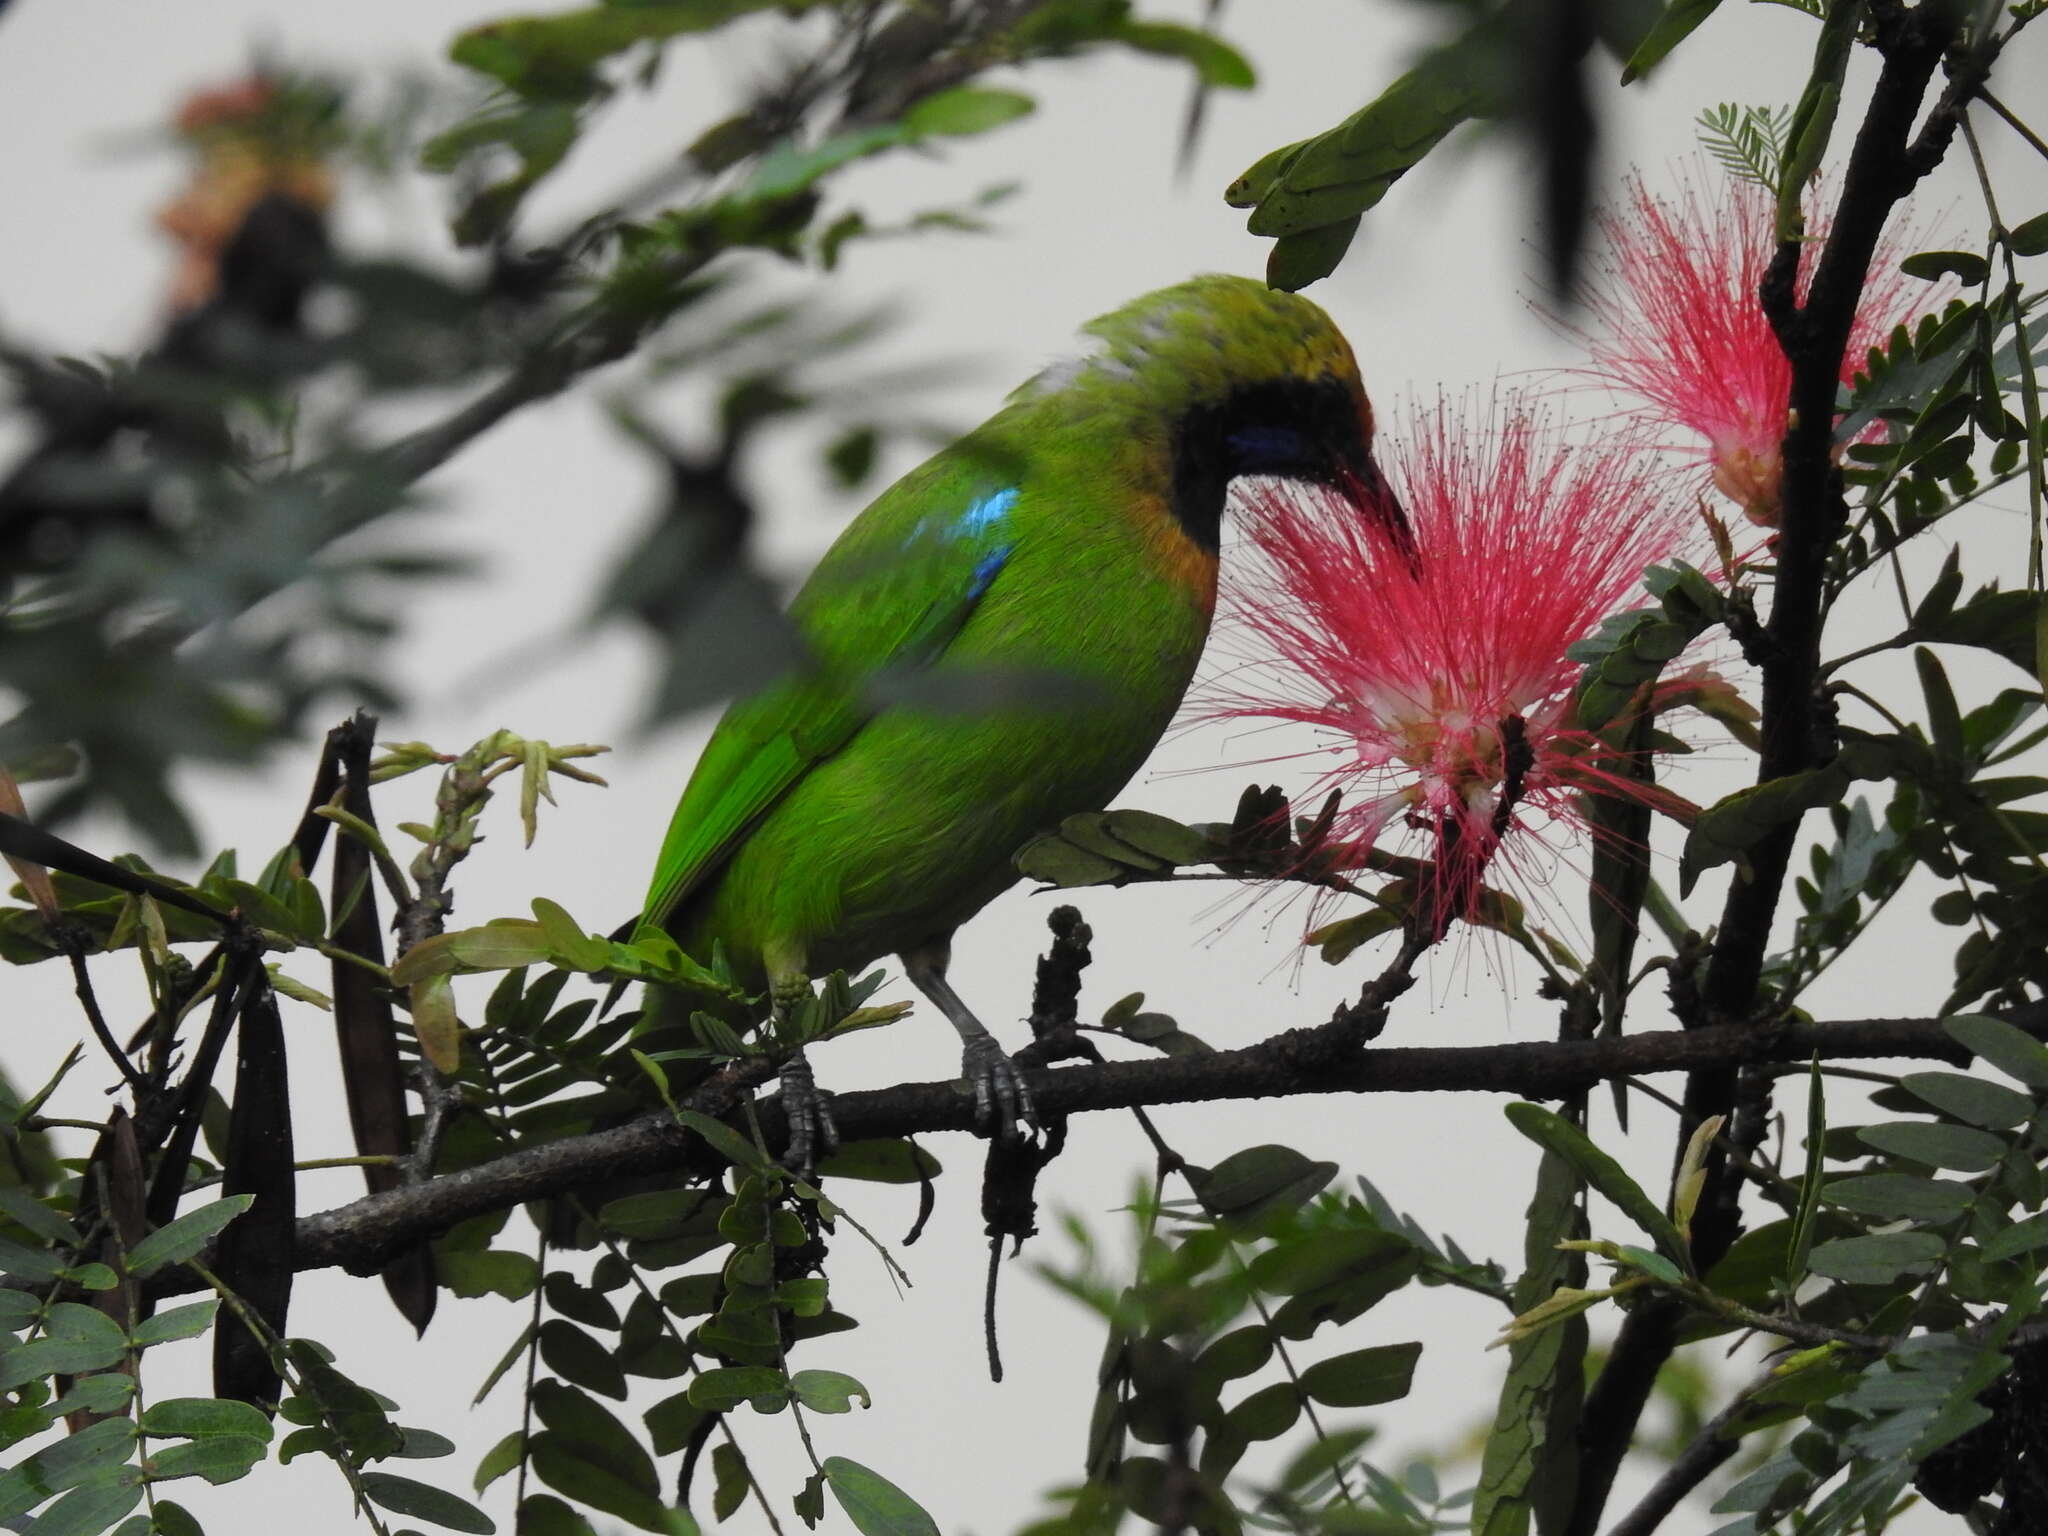 Image of Golden-fronted Leafbird